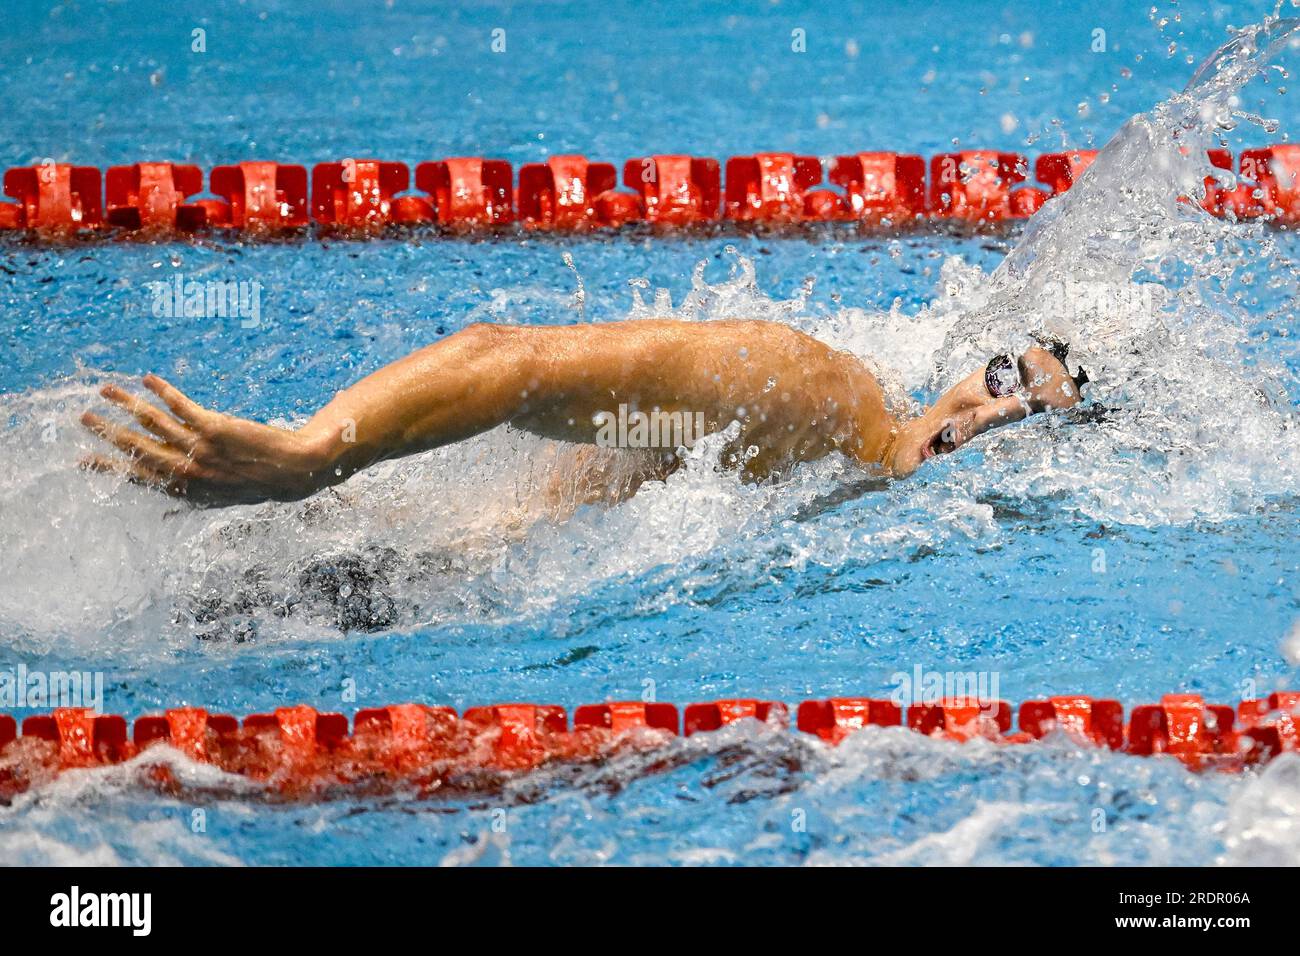 Fukuoka, Japan. 23rd July, 2023. Lorenzo Zazzeri of Italy competes in the Men's 4x100 Freestyle relay preliminary during the 20th World Aquatics Championships at the Marine Messe Hall A in Fukuoka (Japan), July 23rd, 2023. Italy placed 3rd. Credit: Insidefoto di andrea staccioli/Alamy Live News Stock Photo